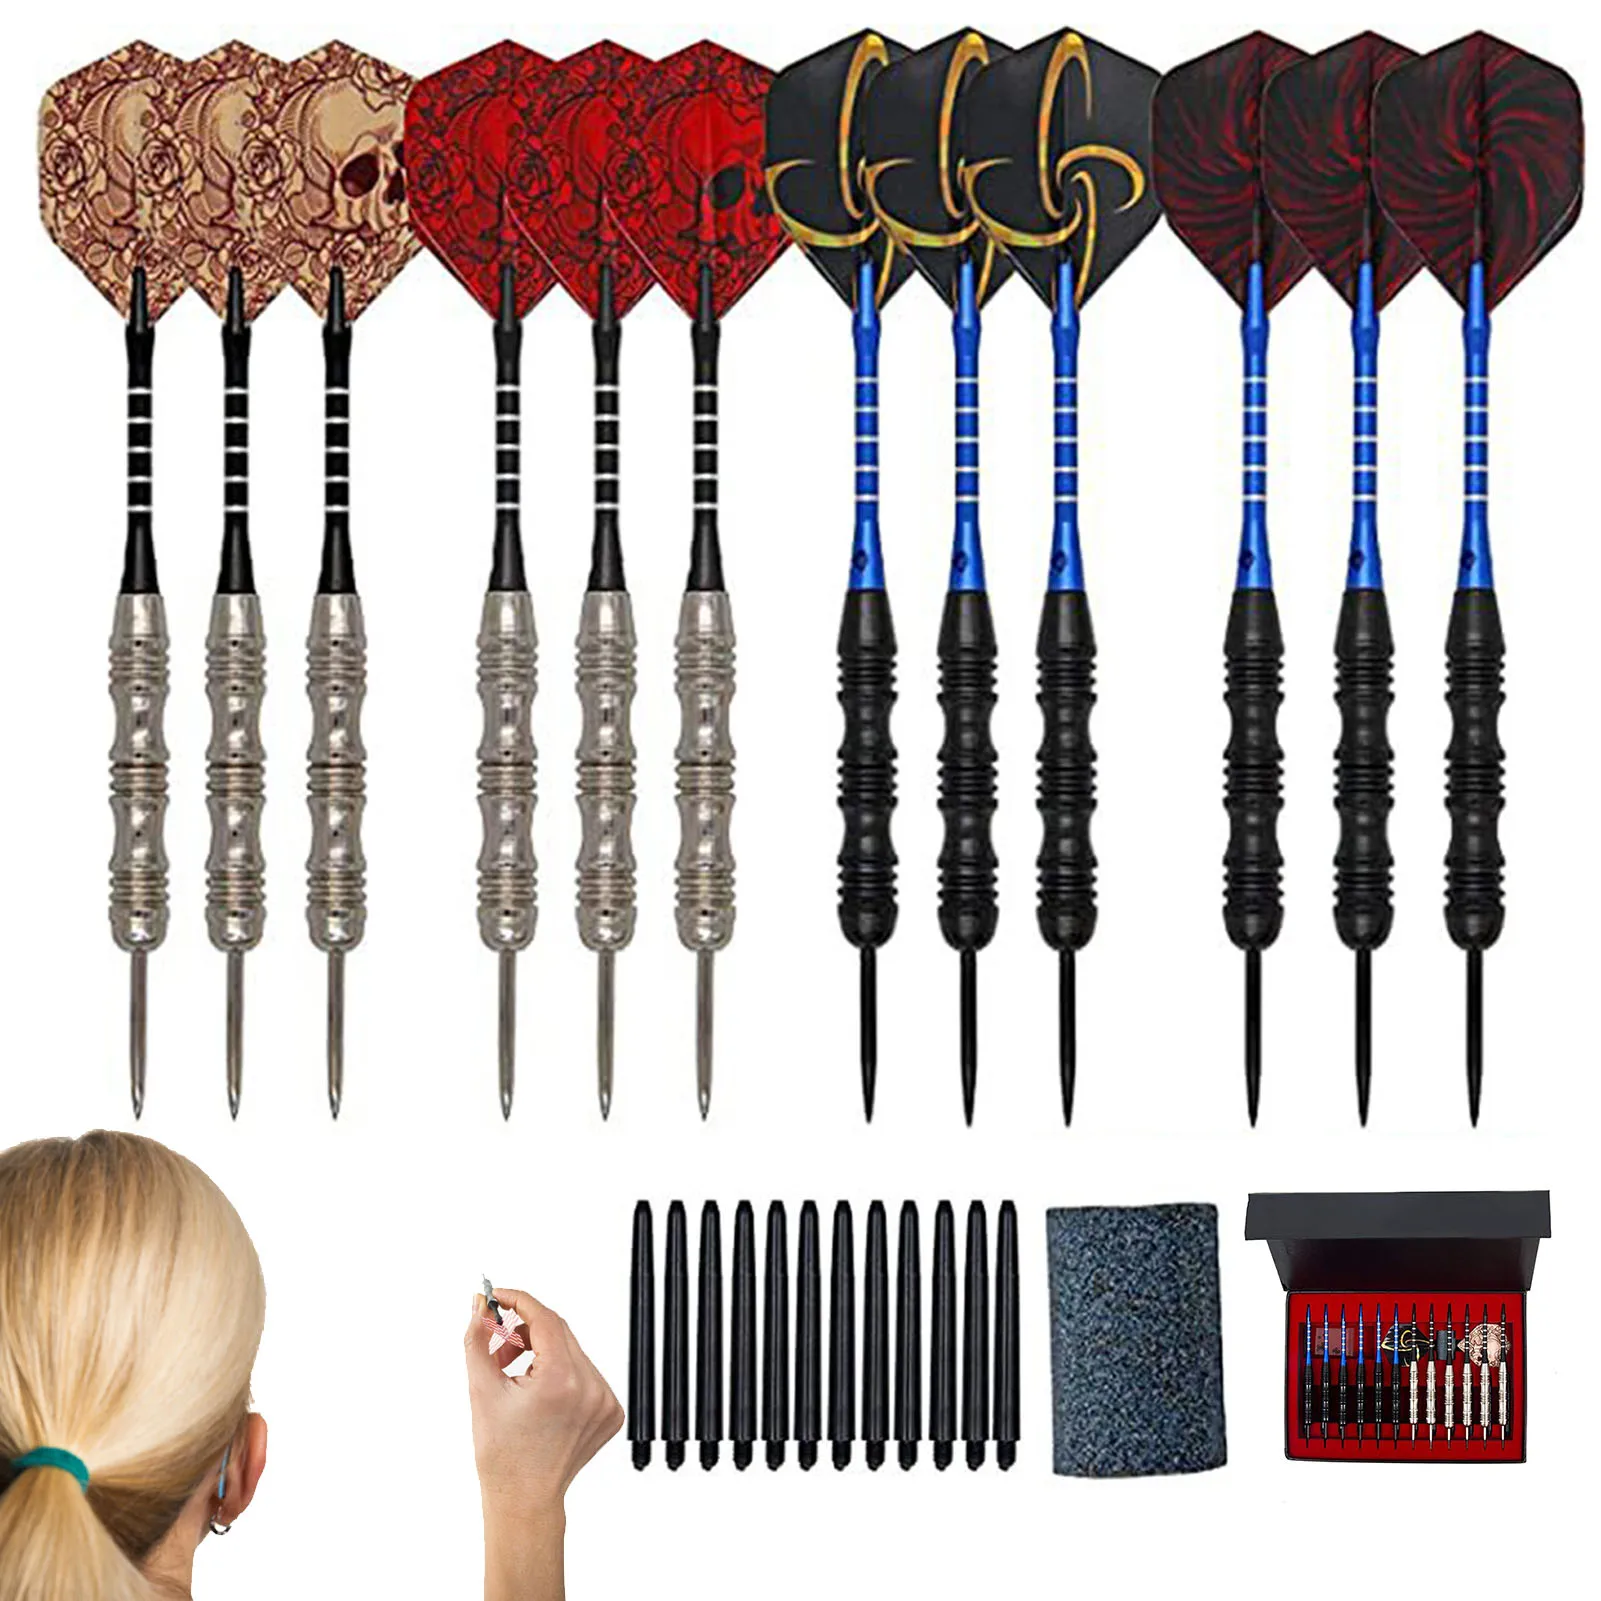 

Tip Darts Set Soft Tip Darts For Dartboard Professional Darts For Family Party Outdoor Exercise Playing With Kids